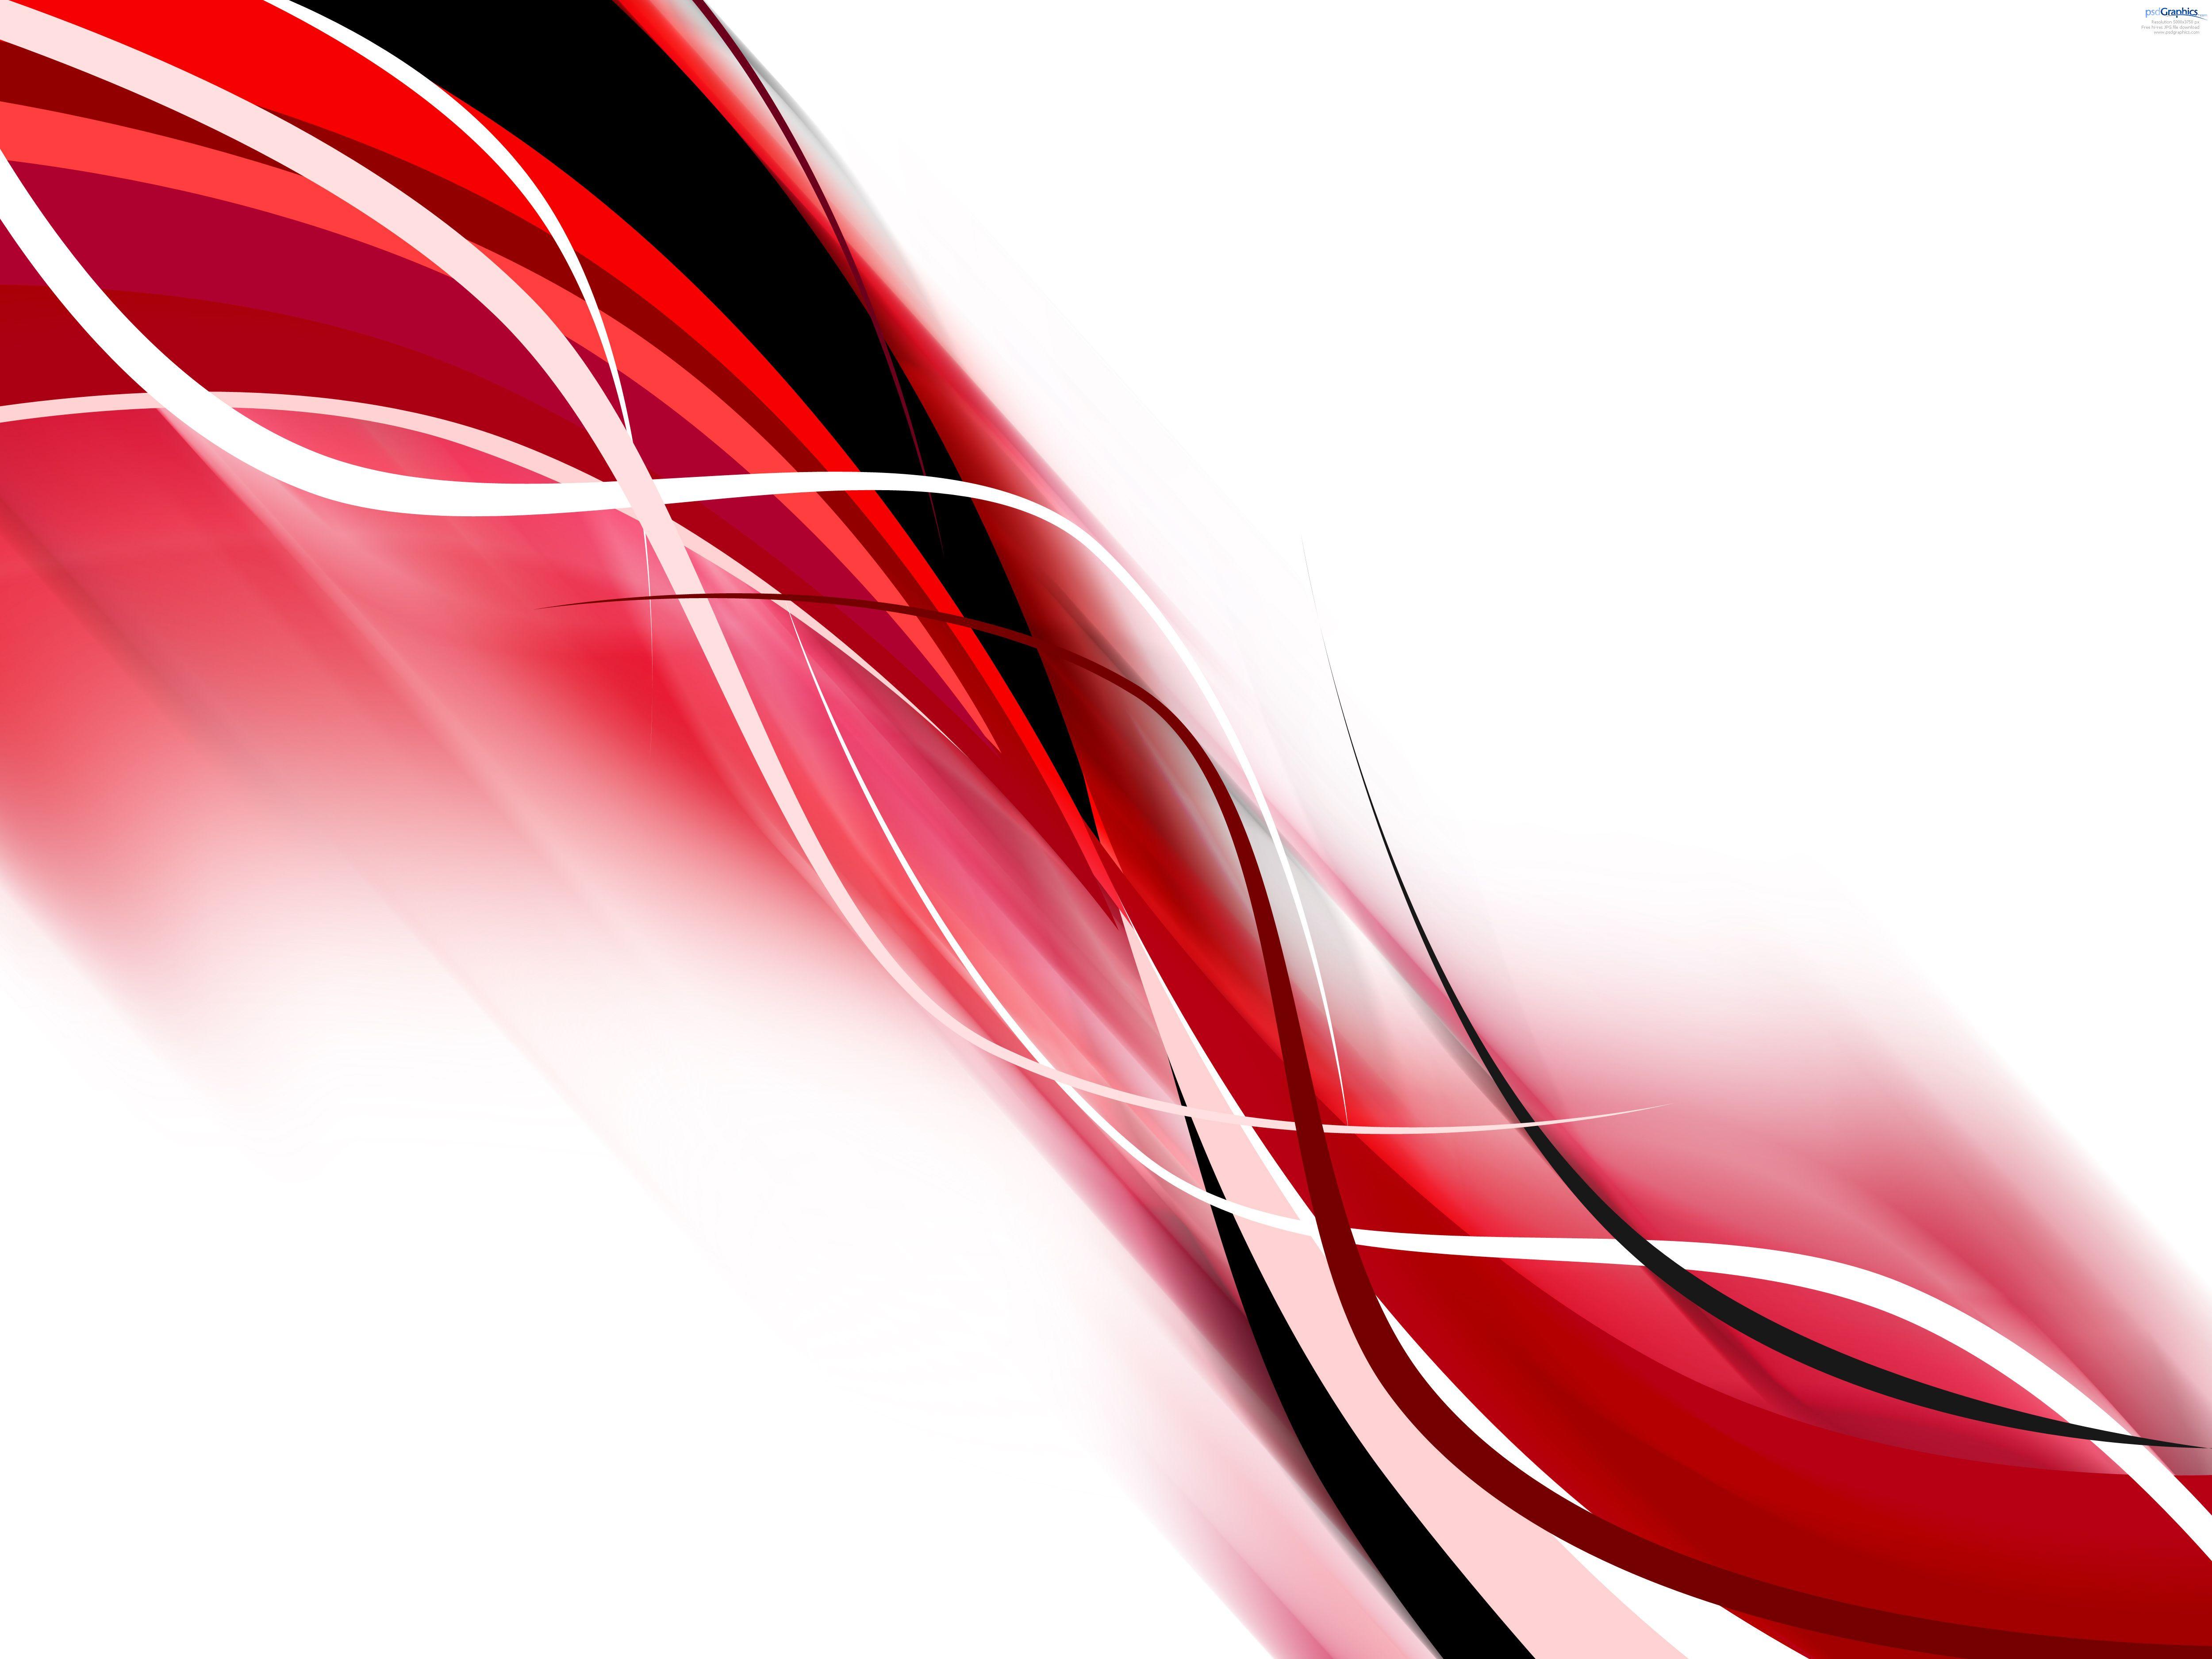 Abstract Art Black And White Red Wallpaper hotfriv